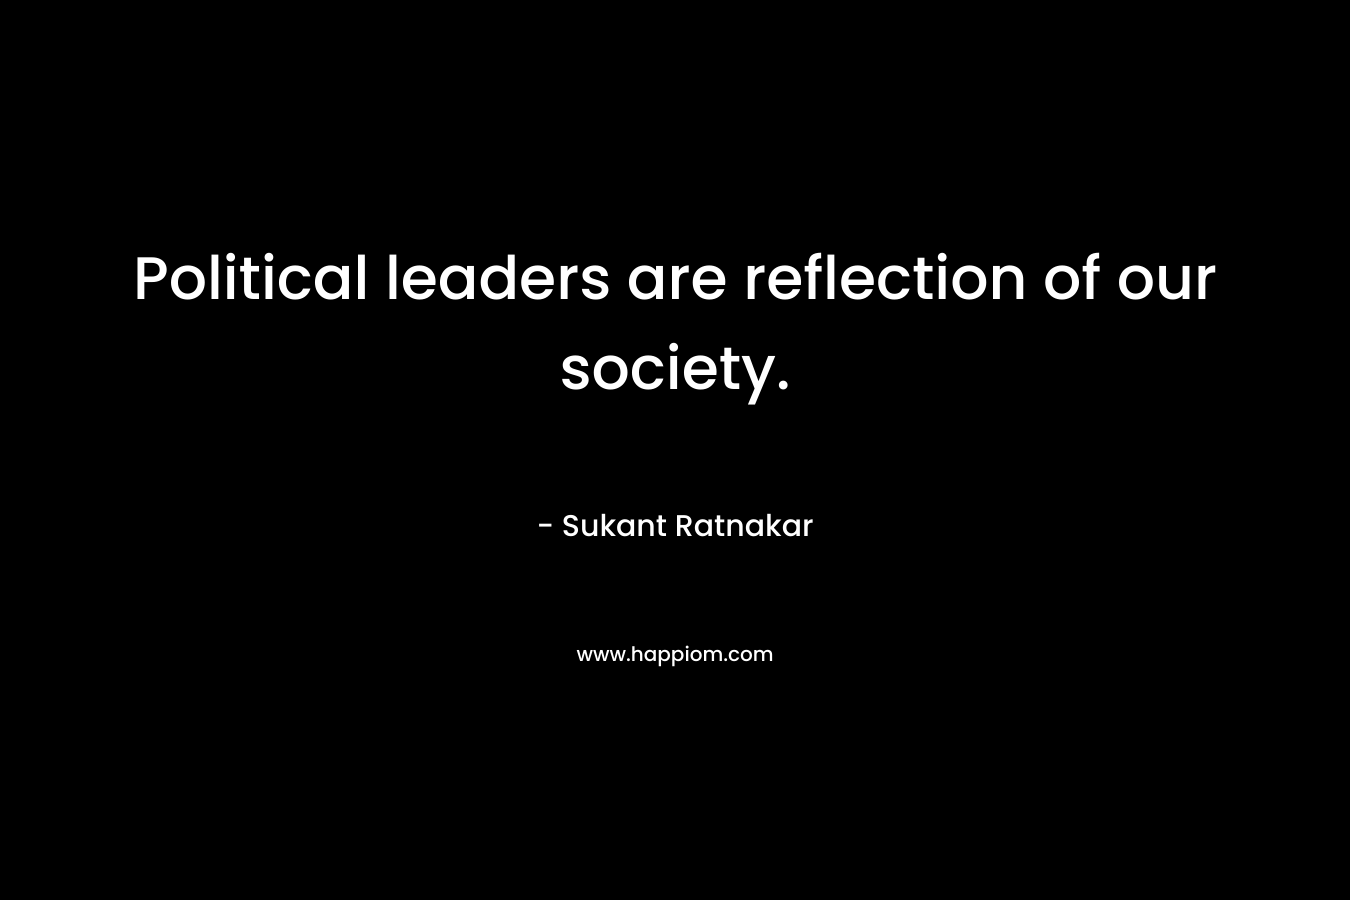 Political leaders are reflection of our society.